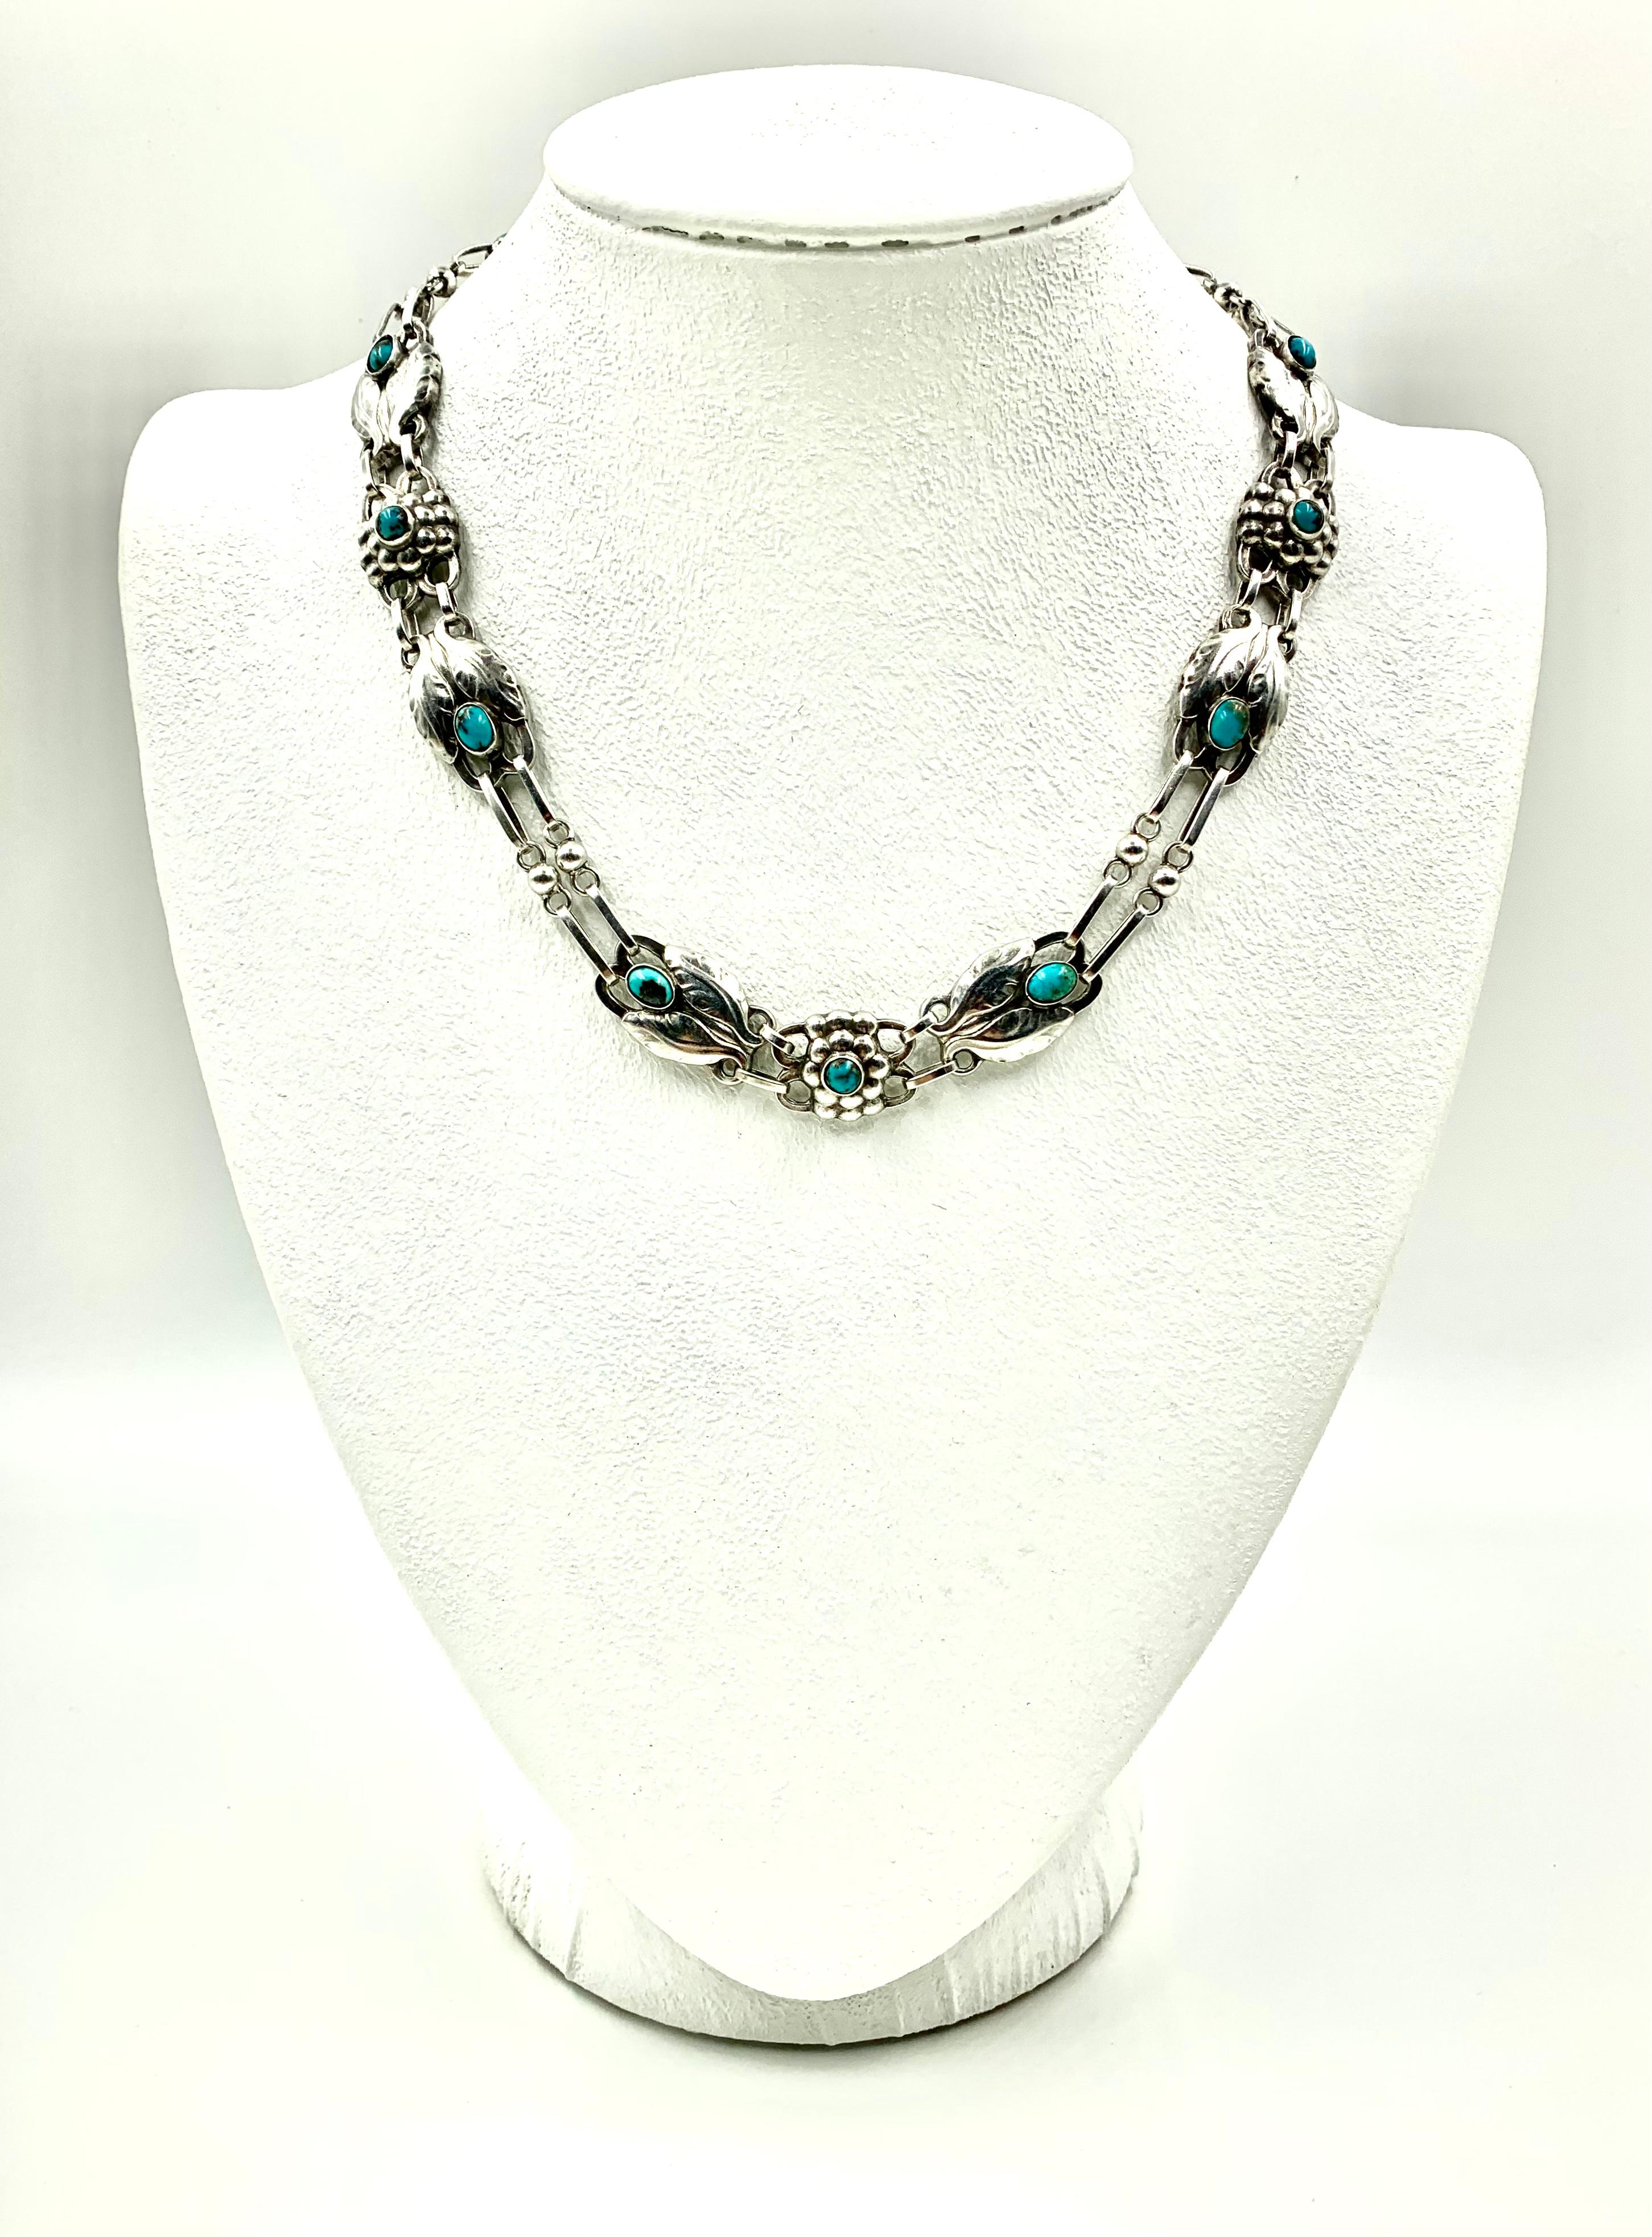 Rare Early Georg Jensen Cabochon Turquoise and Silver #1 Necklace, 1910-1925 For Sale 2